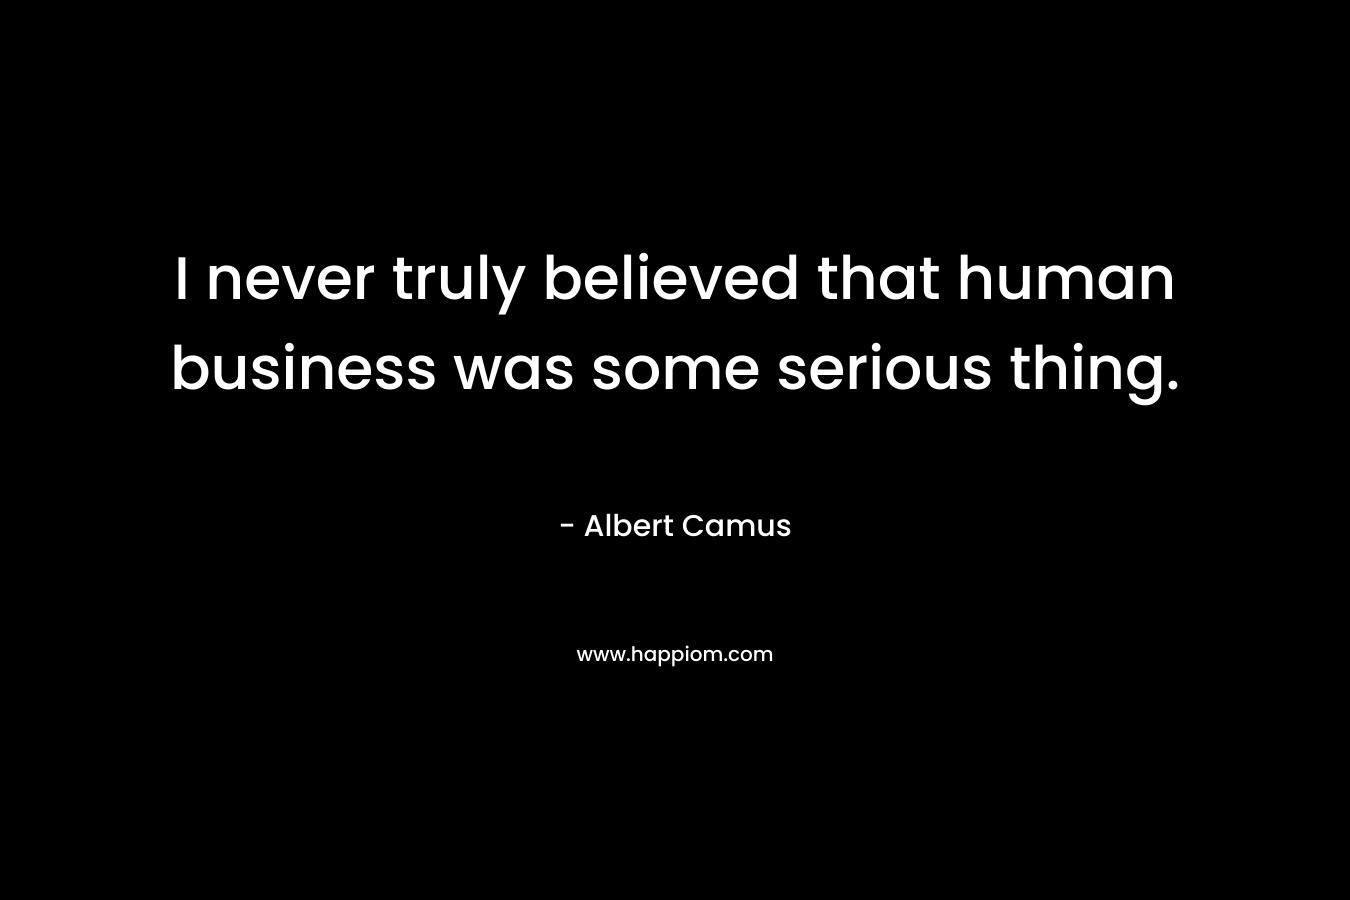 I never truly believed that human business was some serious thing.